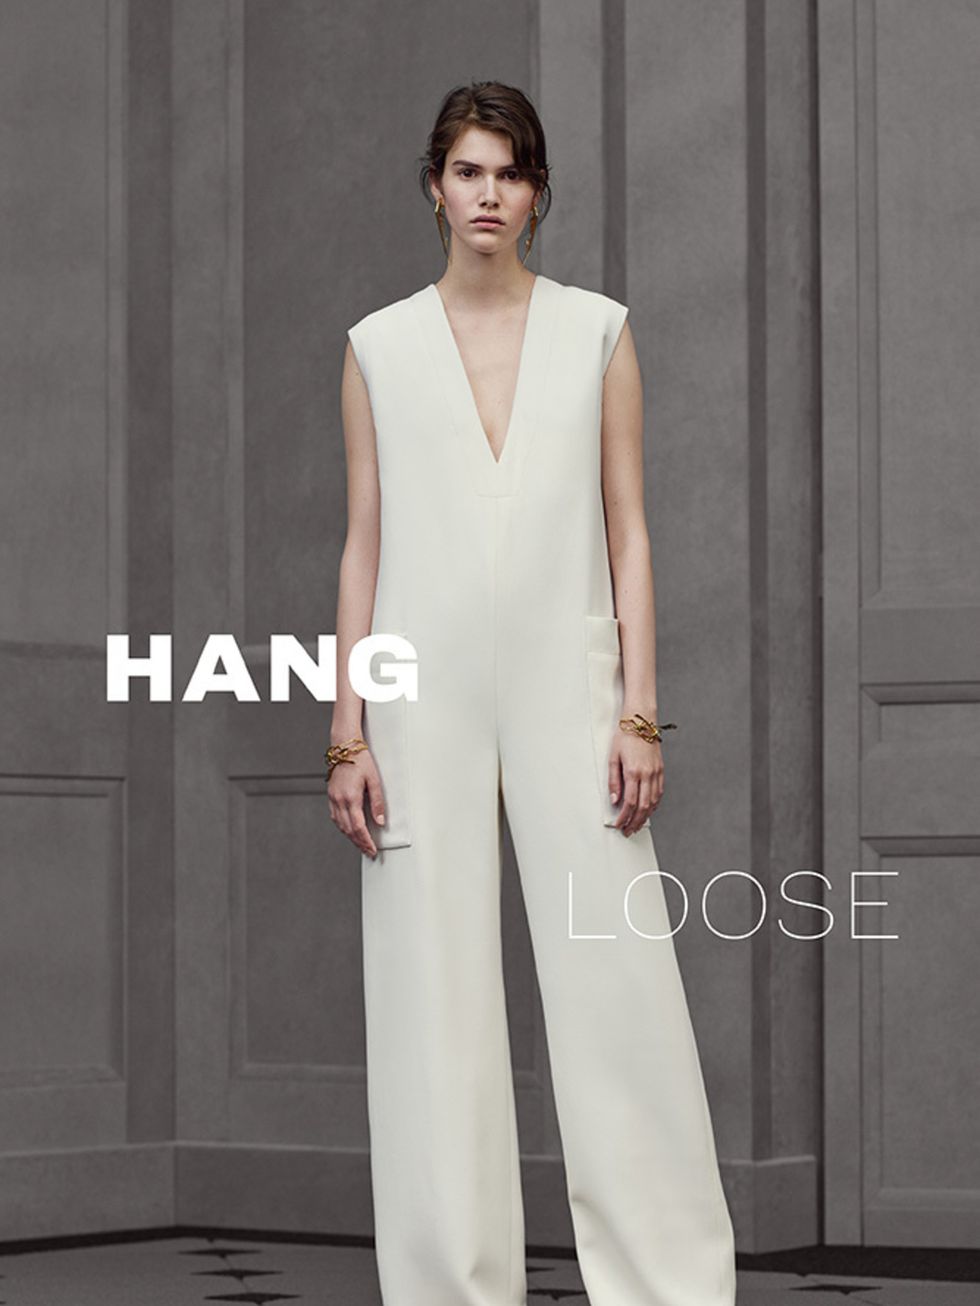 <p>HANG LOOSE </p>

<p>Balenciaga Pre-Spring 2016</p>

<p><br />
Get ahead of the spring/summer catwalk trend for looser, softer tailored pieces with these effortless wear-any-day clothes.</p>

<p><br />
How to wear now: Layered together. Note: trousers a